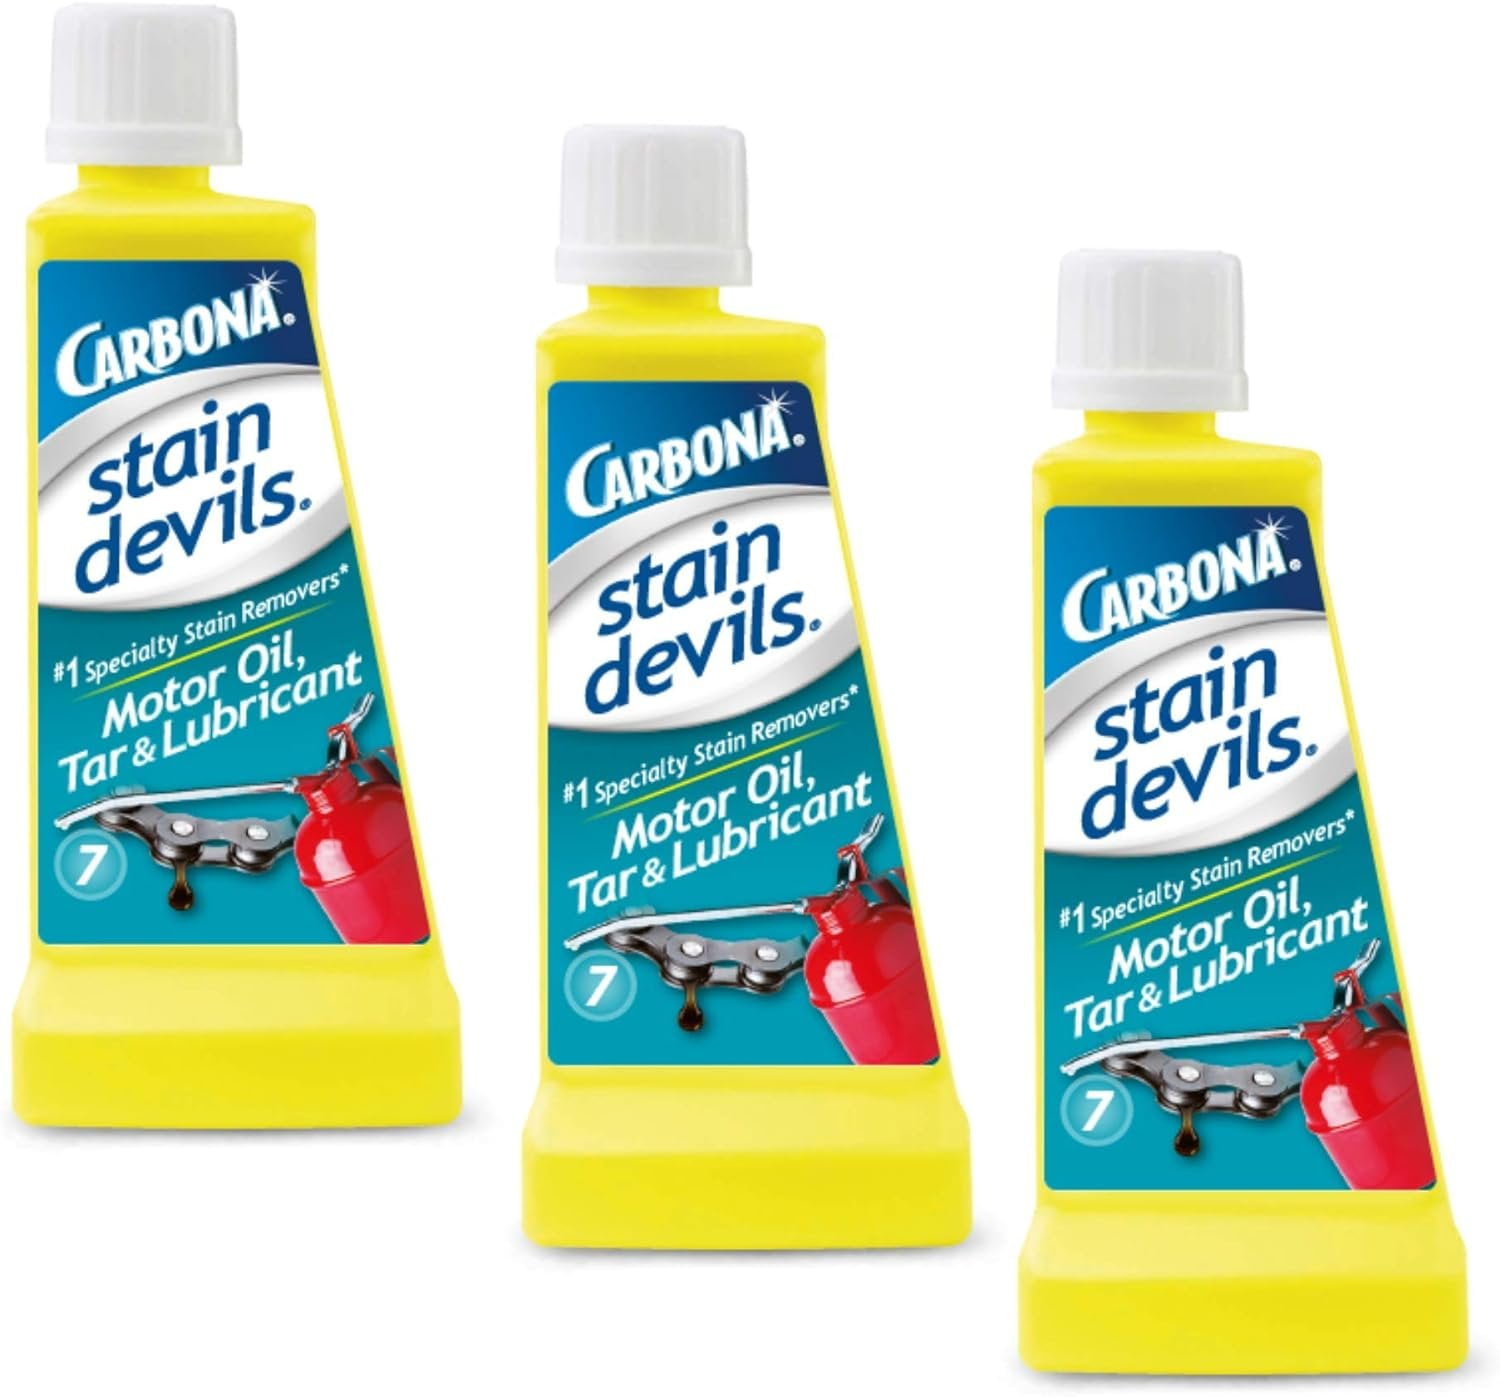 Carbona Stain Devils Blood & Dairy Spot Remover Stain Remover, 1.7 fl oz -  Baker's